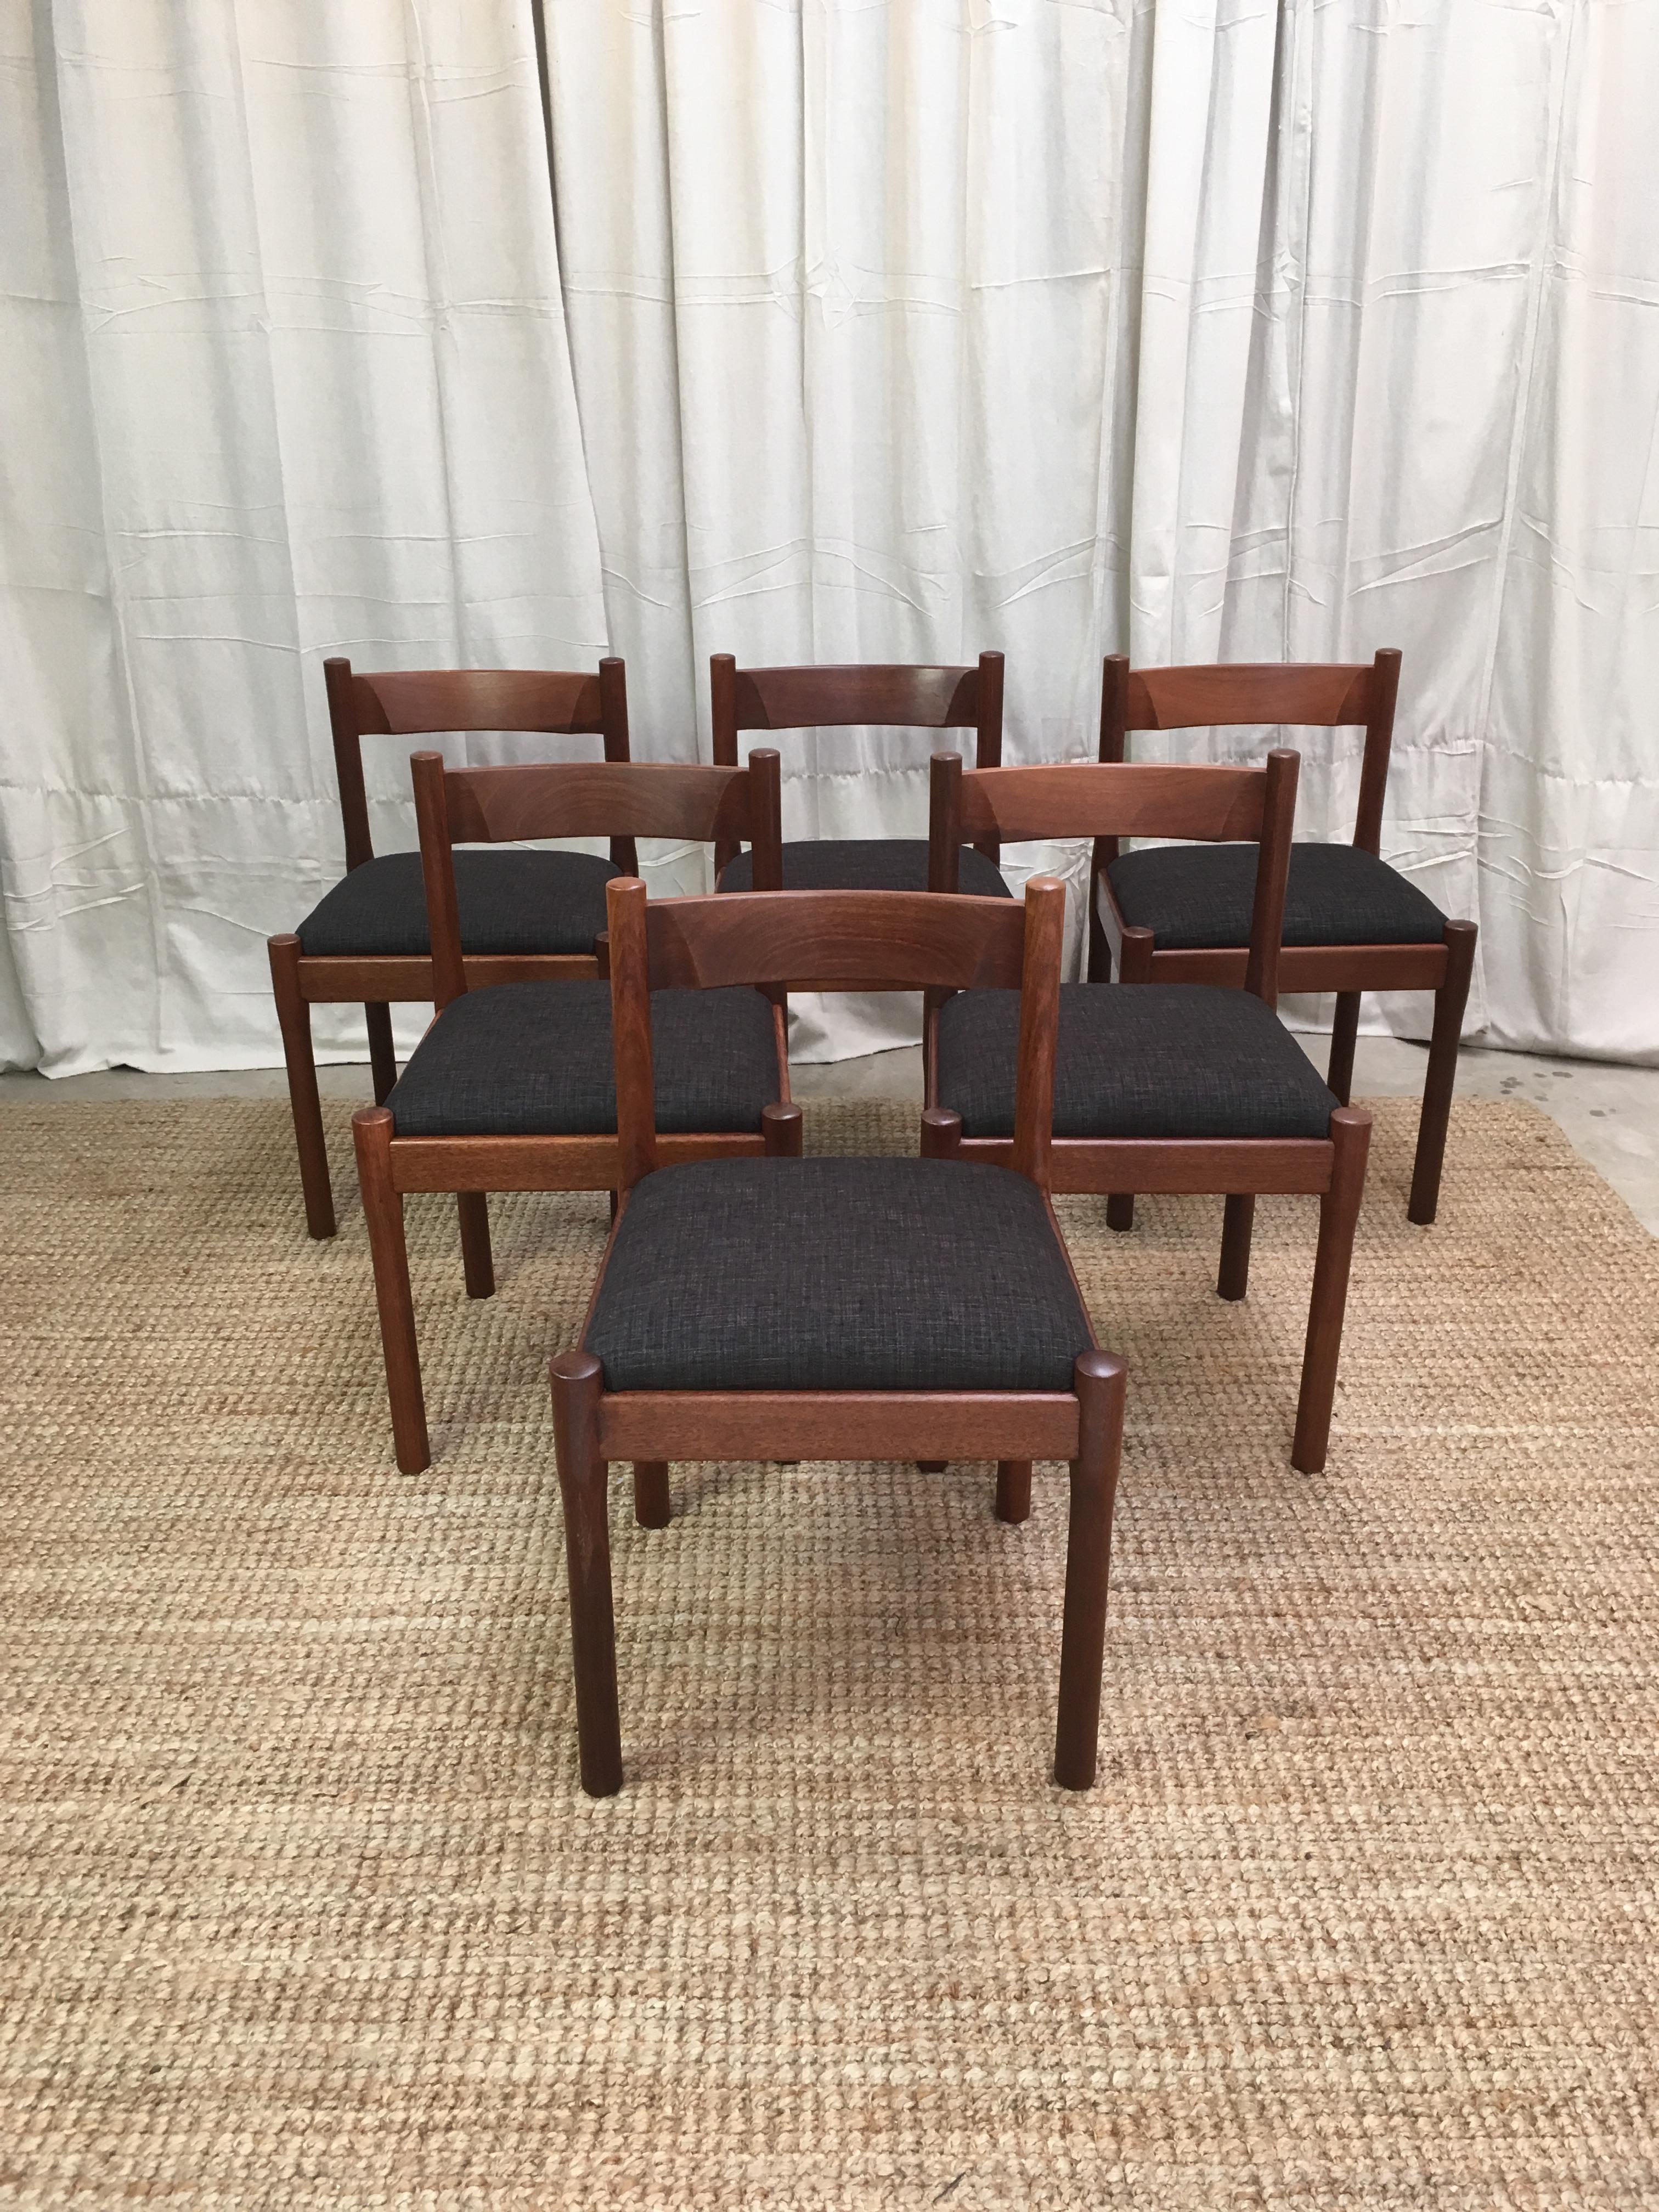 Whoa, we tested the timber for an export permission and found it’s Jarrah, not Rosewood. Didn’t know this before but found out CATT Furniture, Western Australia, produced this exact copy of the Vico Magistretti Carimate chair in 1967, three years